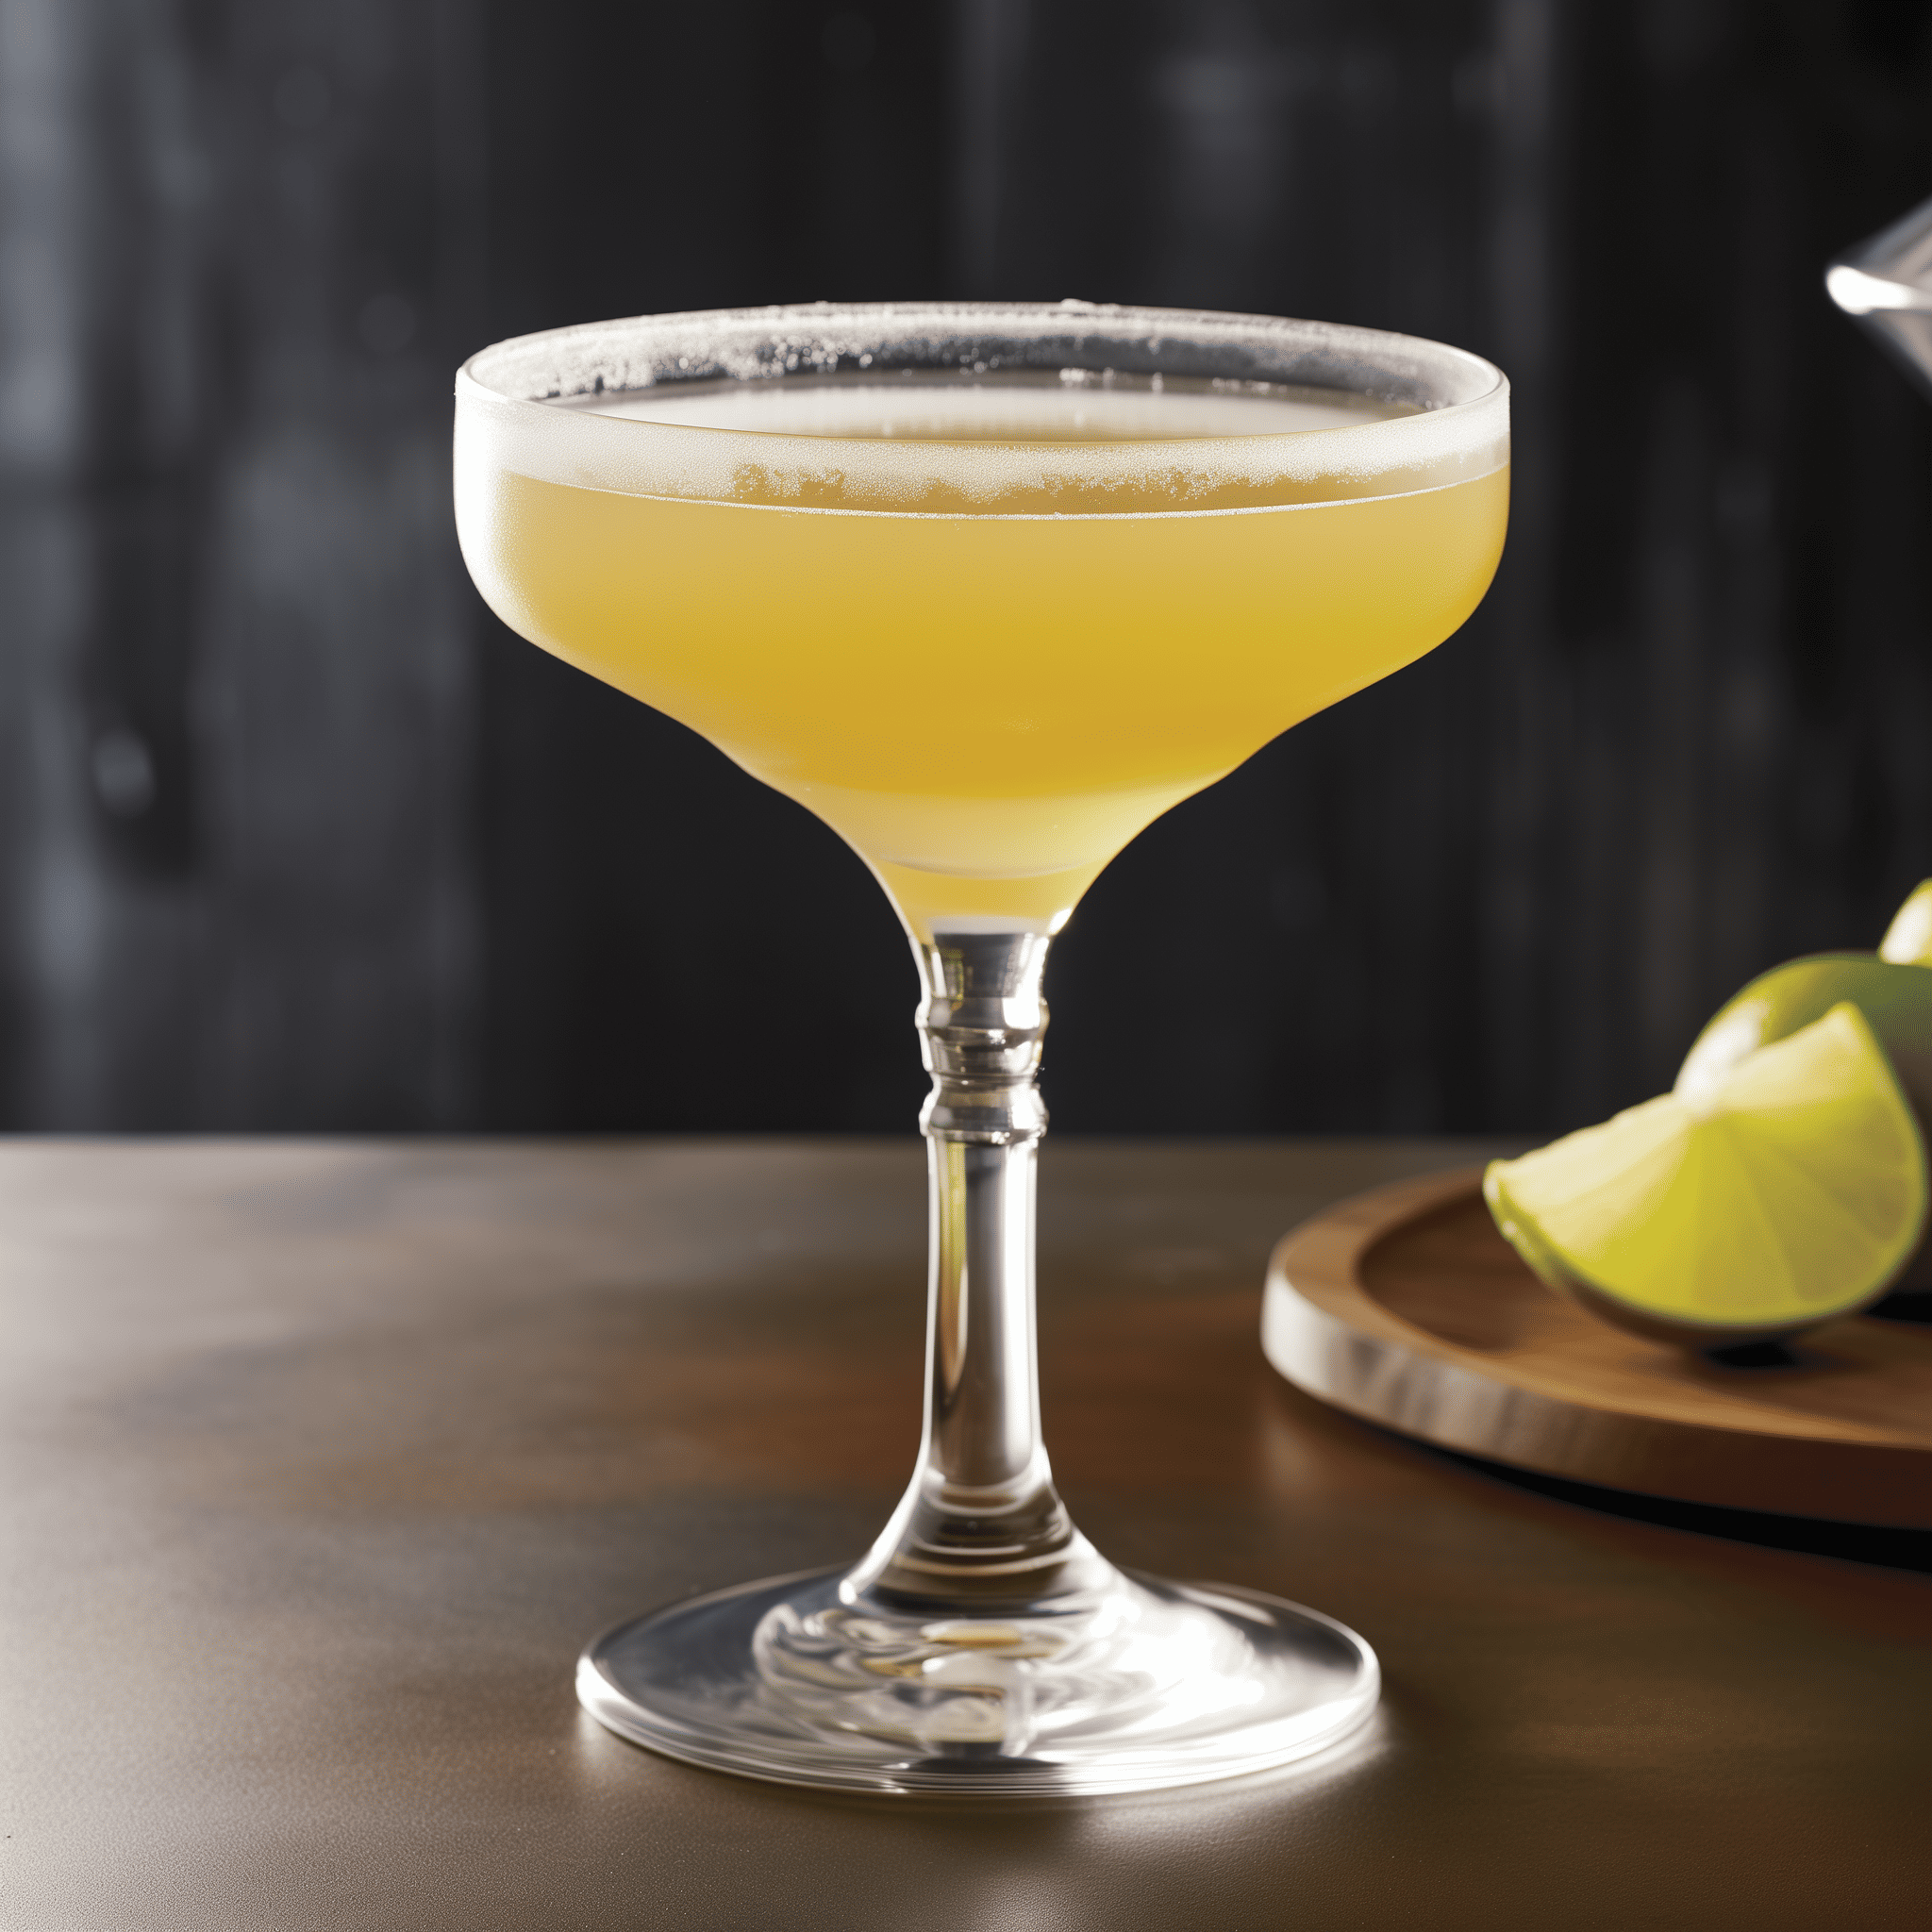 Boston Sidecar Cocktail Recipe - The Boston Sidecar offers a harmonious blend of sour and sweet with a robust spirit backbone. The rum adds a touch of tropical warmth, while the brandy provides a rich, fruity depth. The triple sec delivers a bright citrus note, making the cocktail complex and well-rounded.